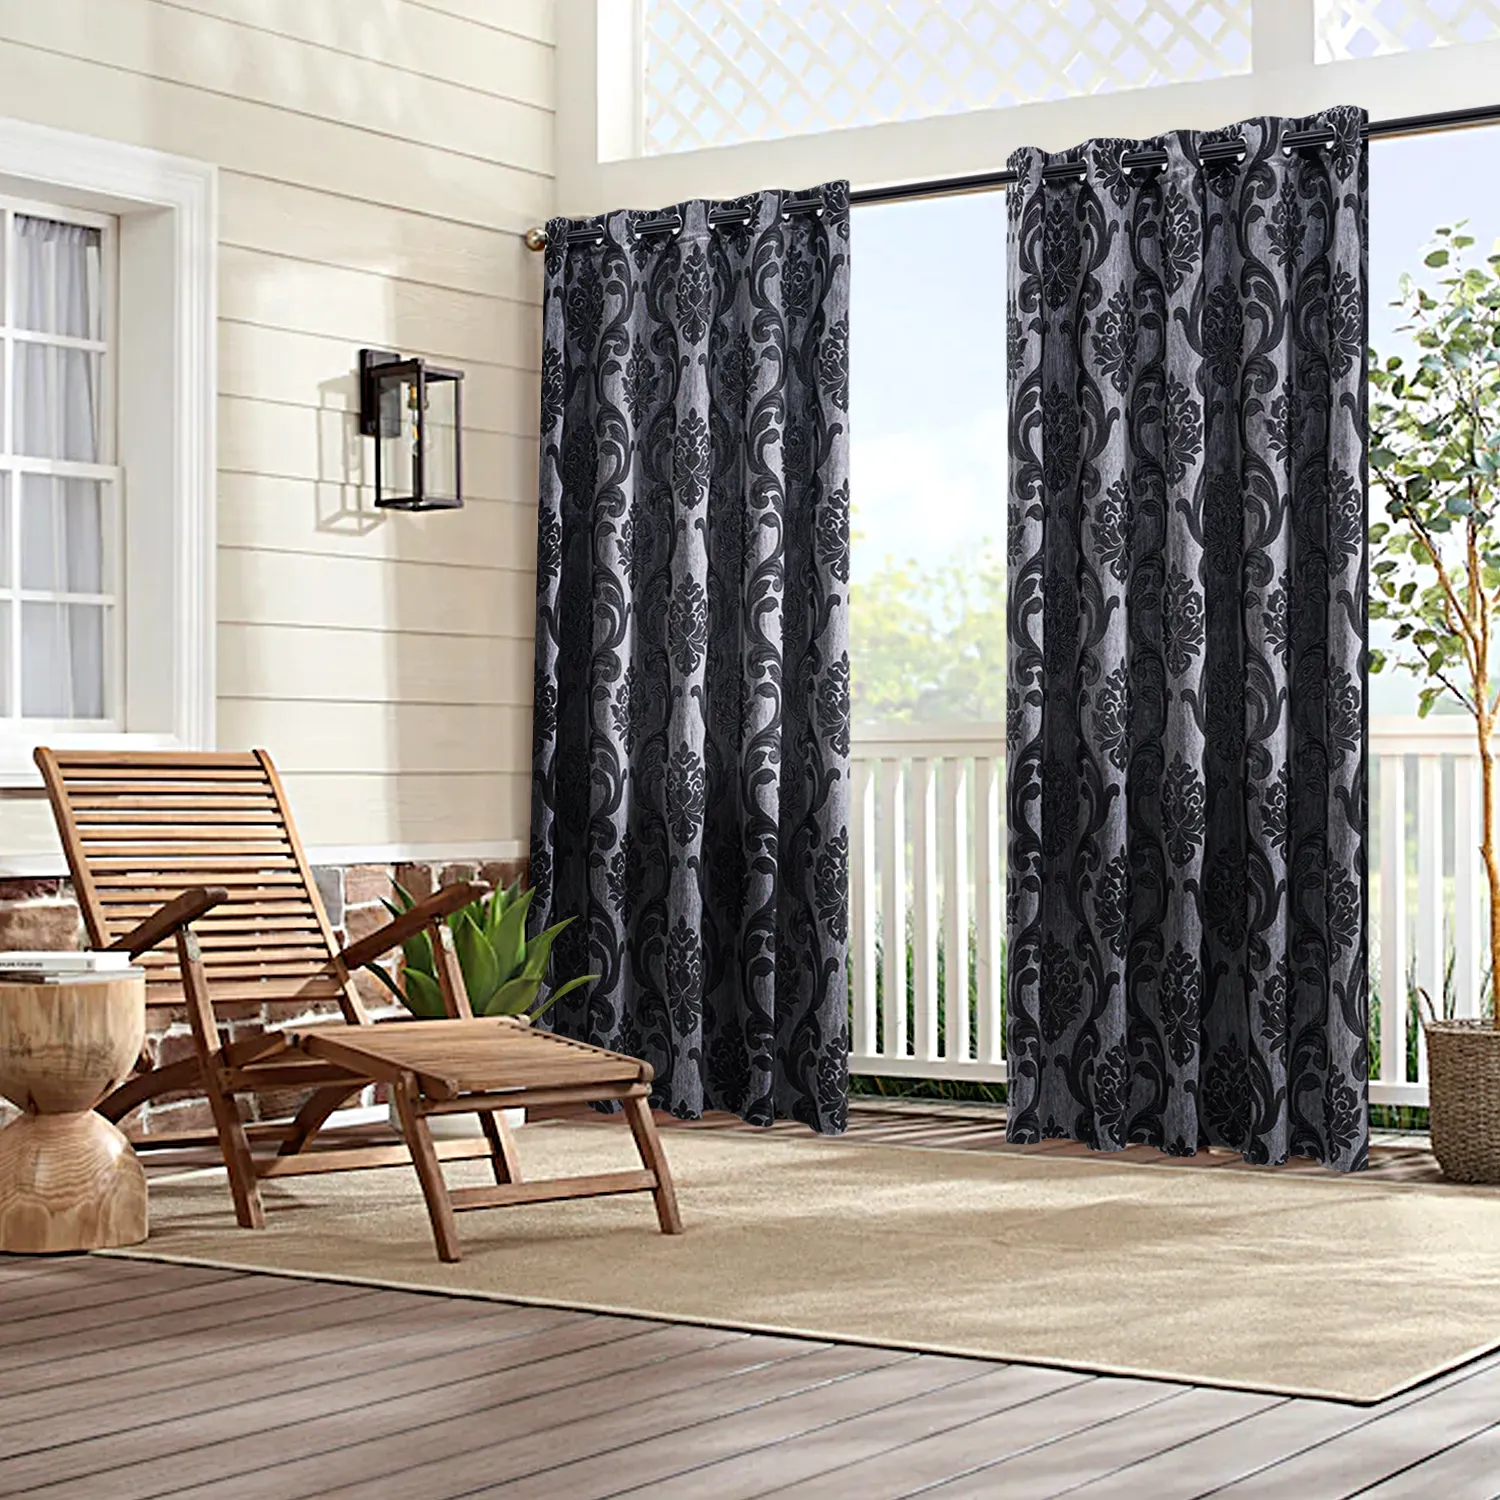 Ready Made Outdoor Curtains Luxury European Style Classic Royal Quality Blackout Cortinas Curtains for the Living Room Luxury